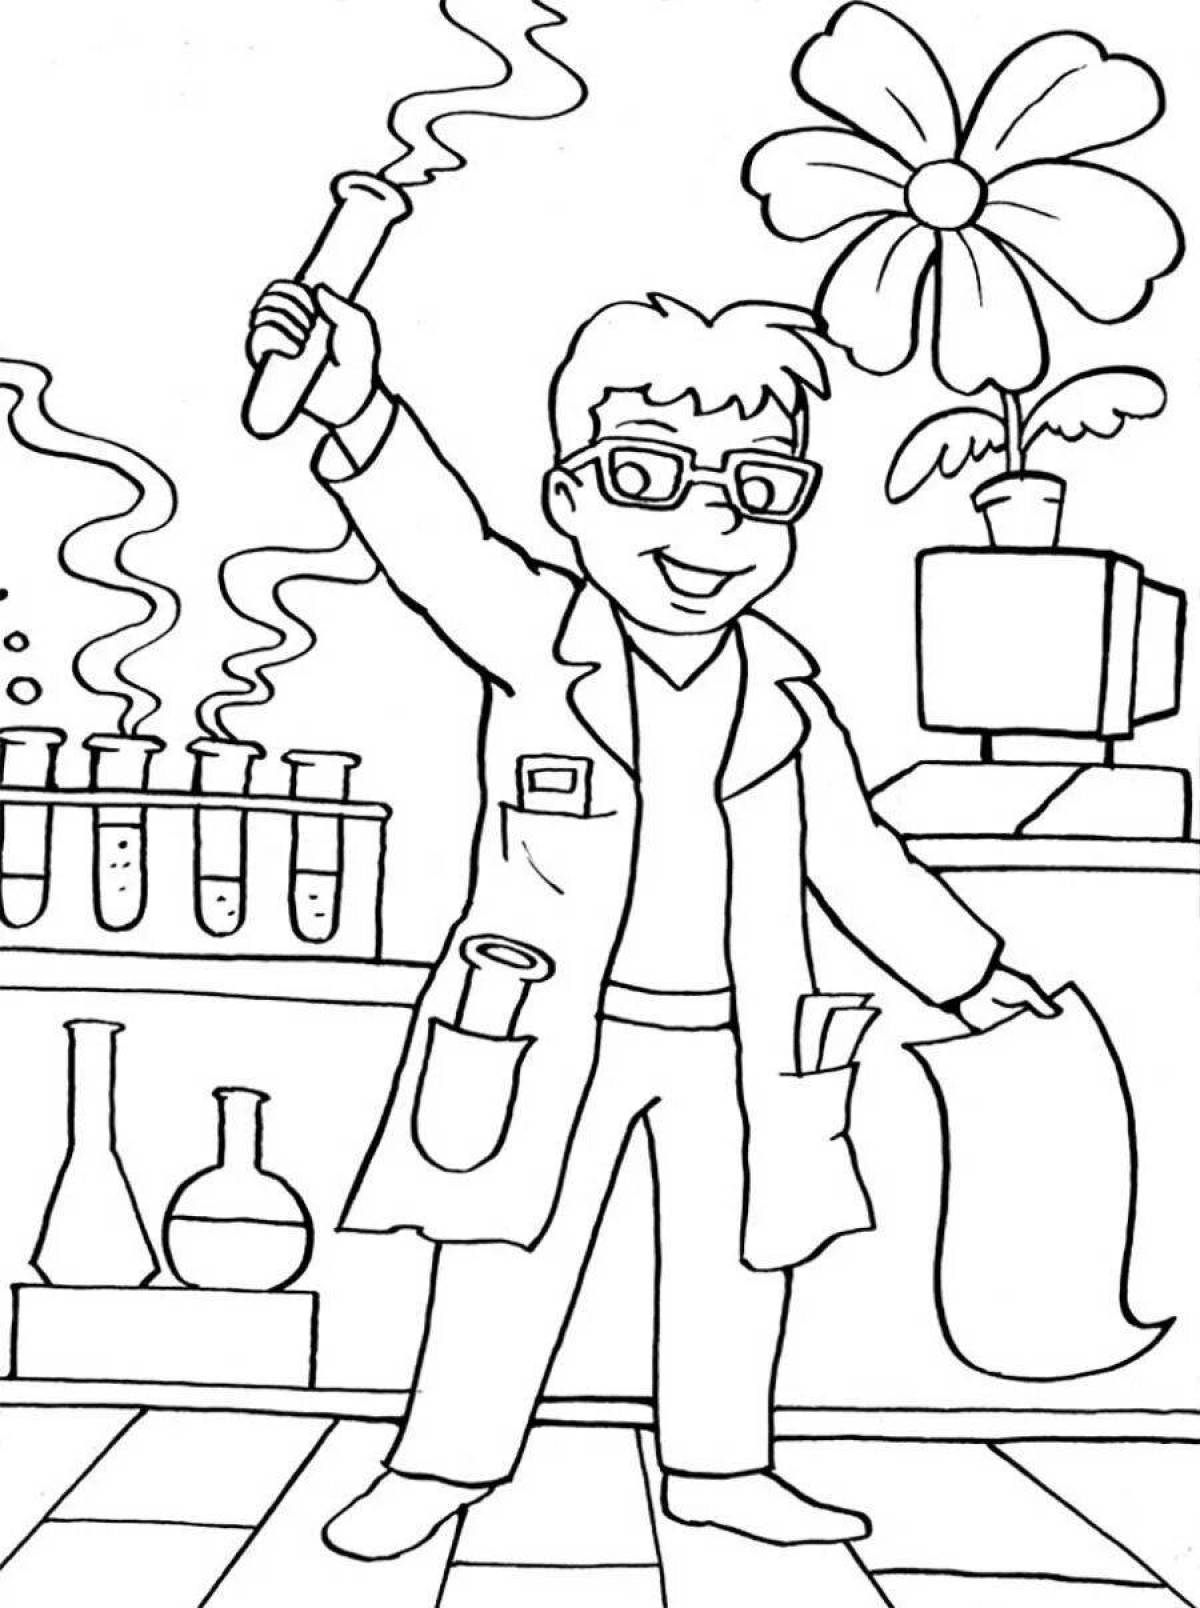 Colorful carpenter coloring page